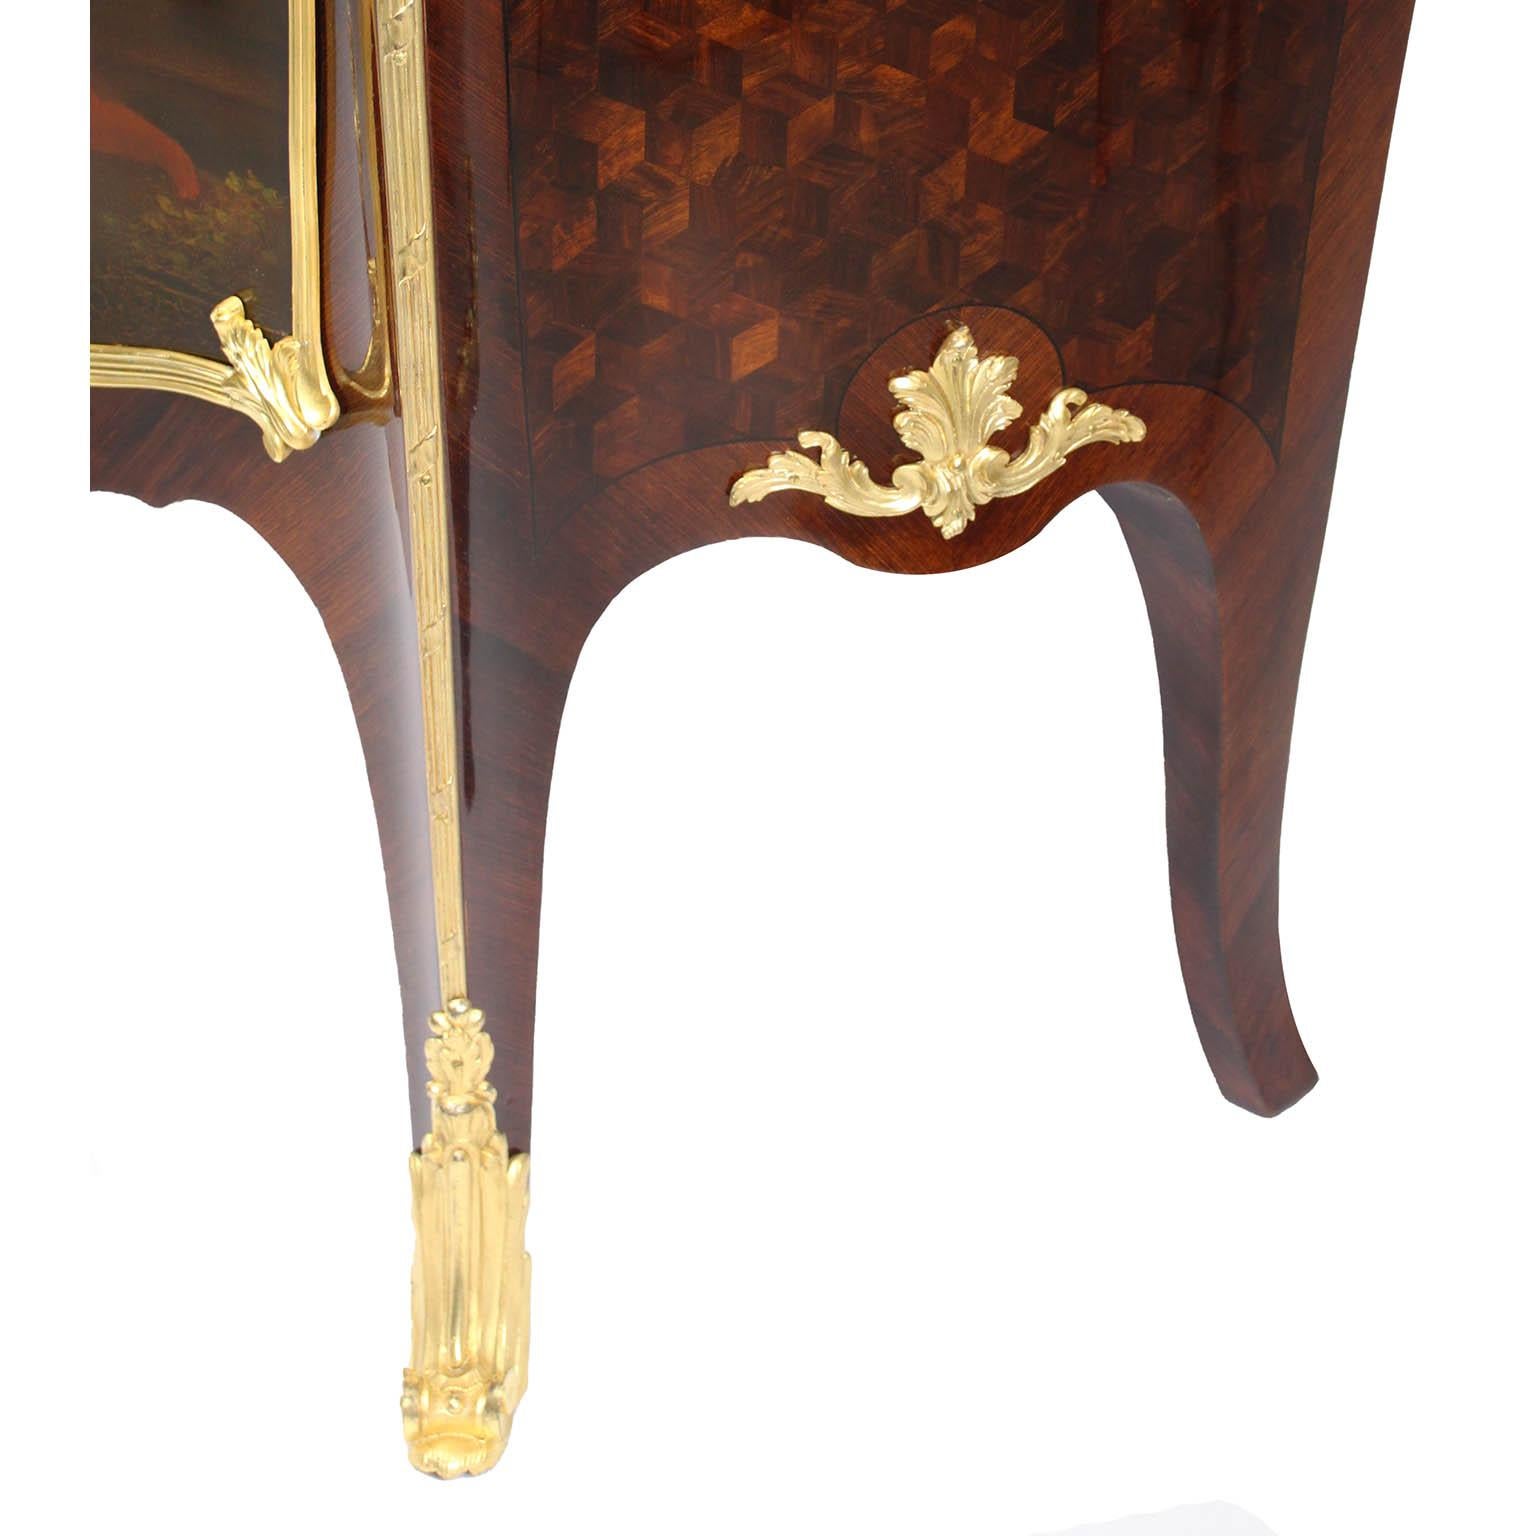 French 19th C. Louis XV Style Ormolu-Mounted Vernis Martin Cabinet by F. Linke For Sale 3